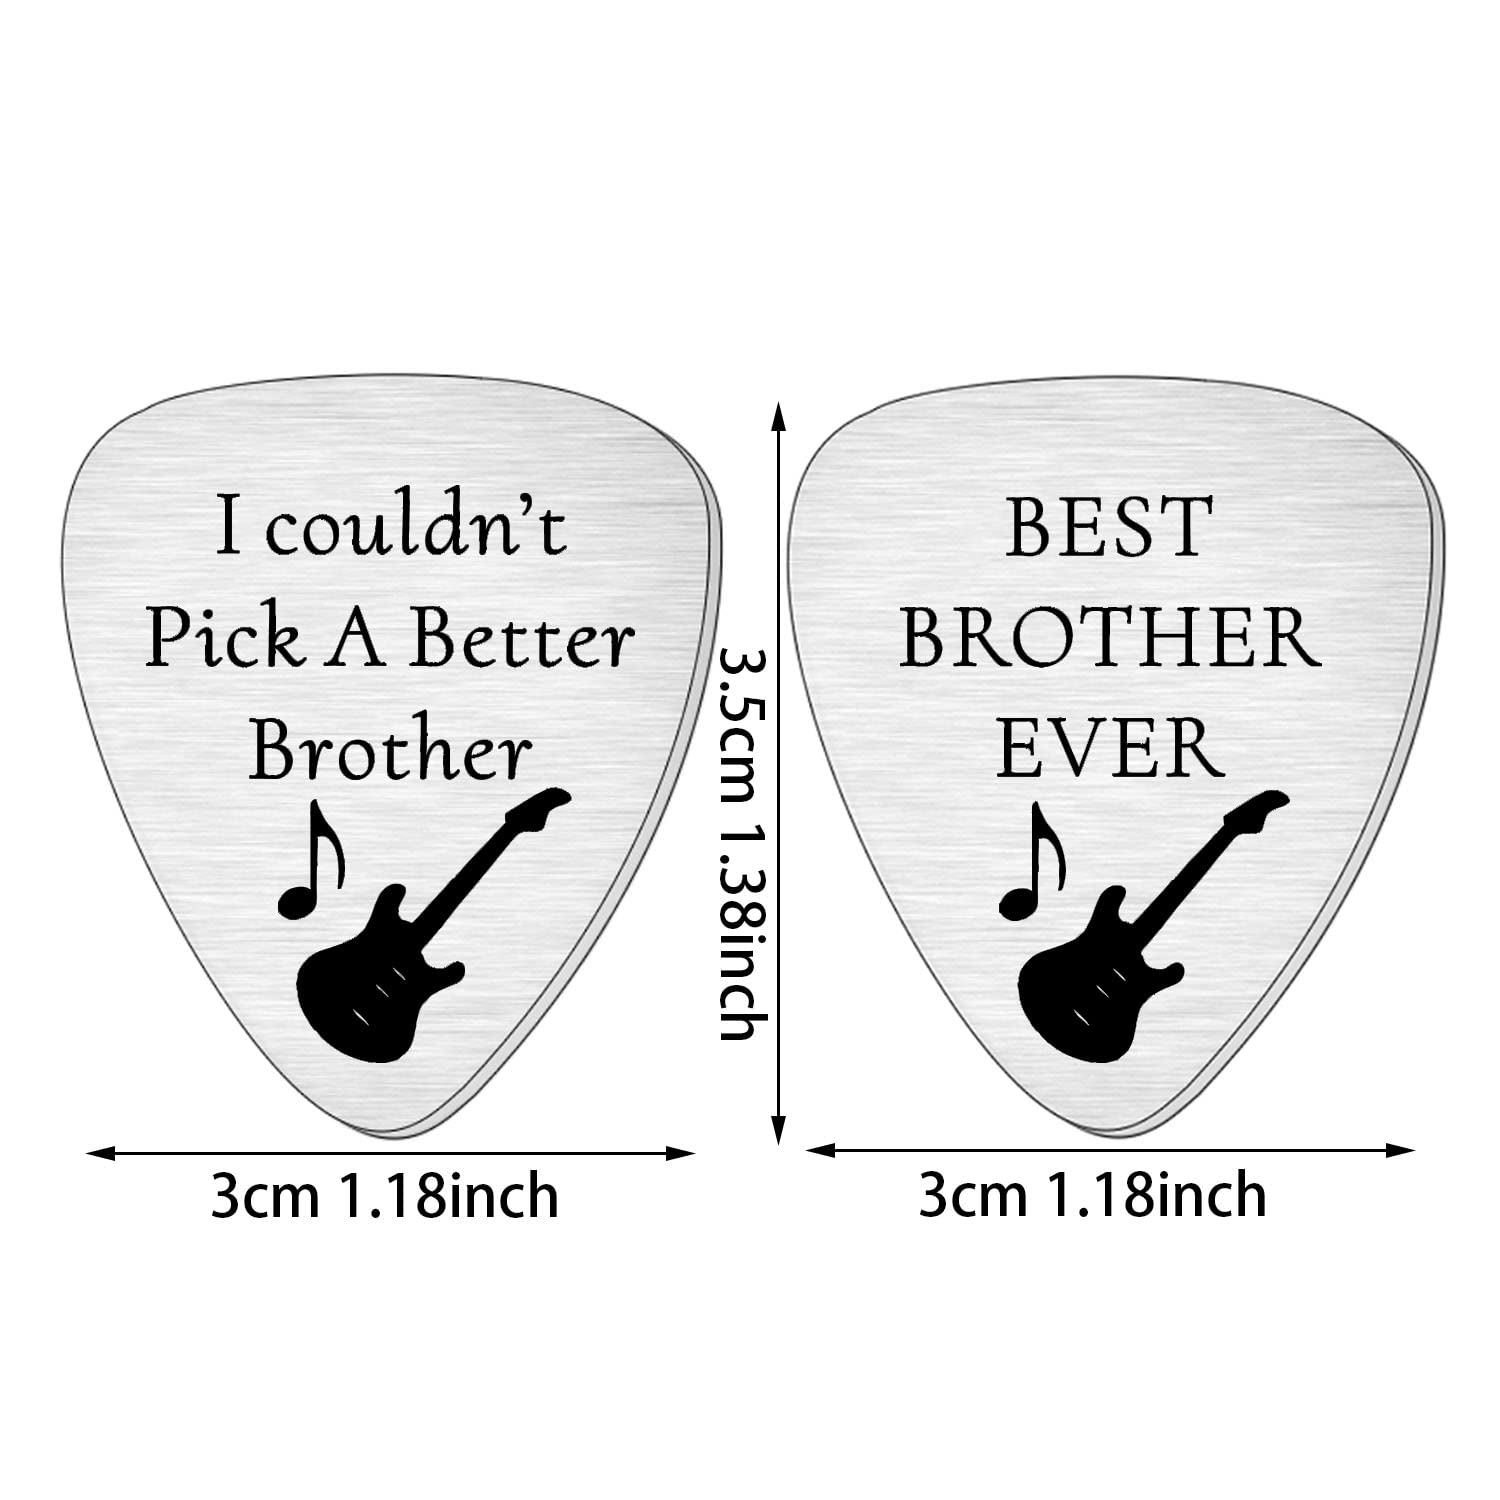 SMARGO I Couldn't Pick A Better Brother Guitar Picks Plectrum Gifts For Birthday Christmas Presents Best Brother Ever From Sister